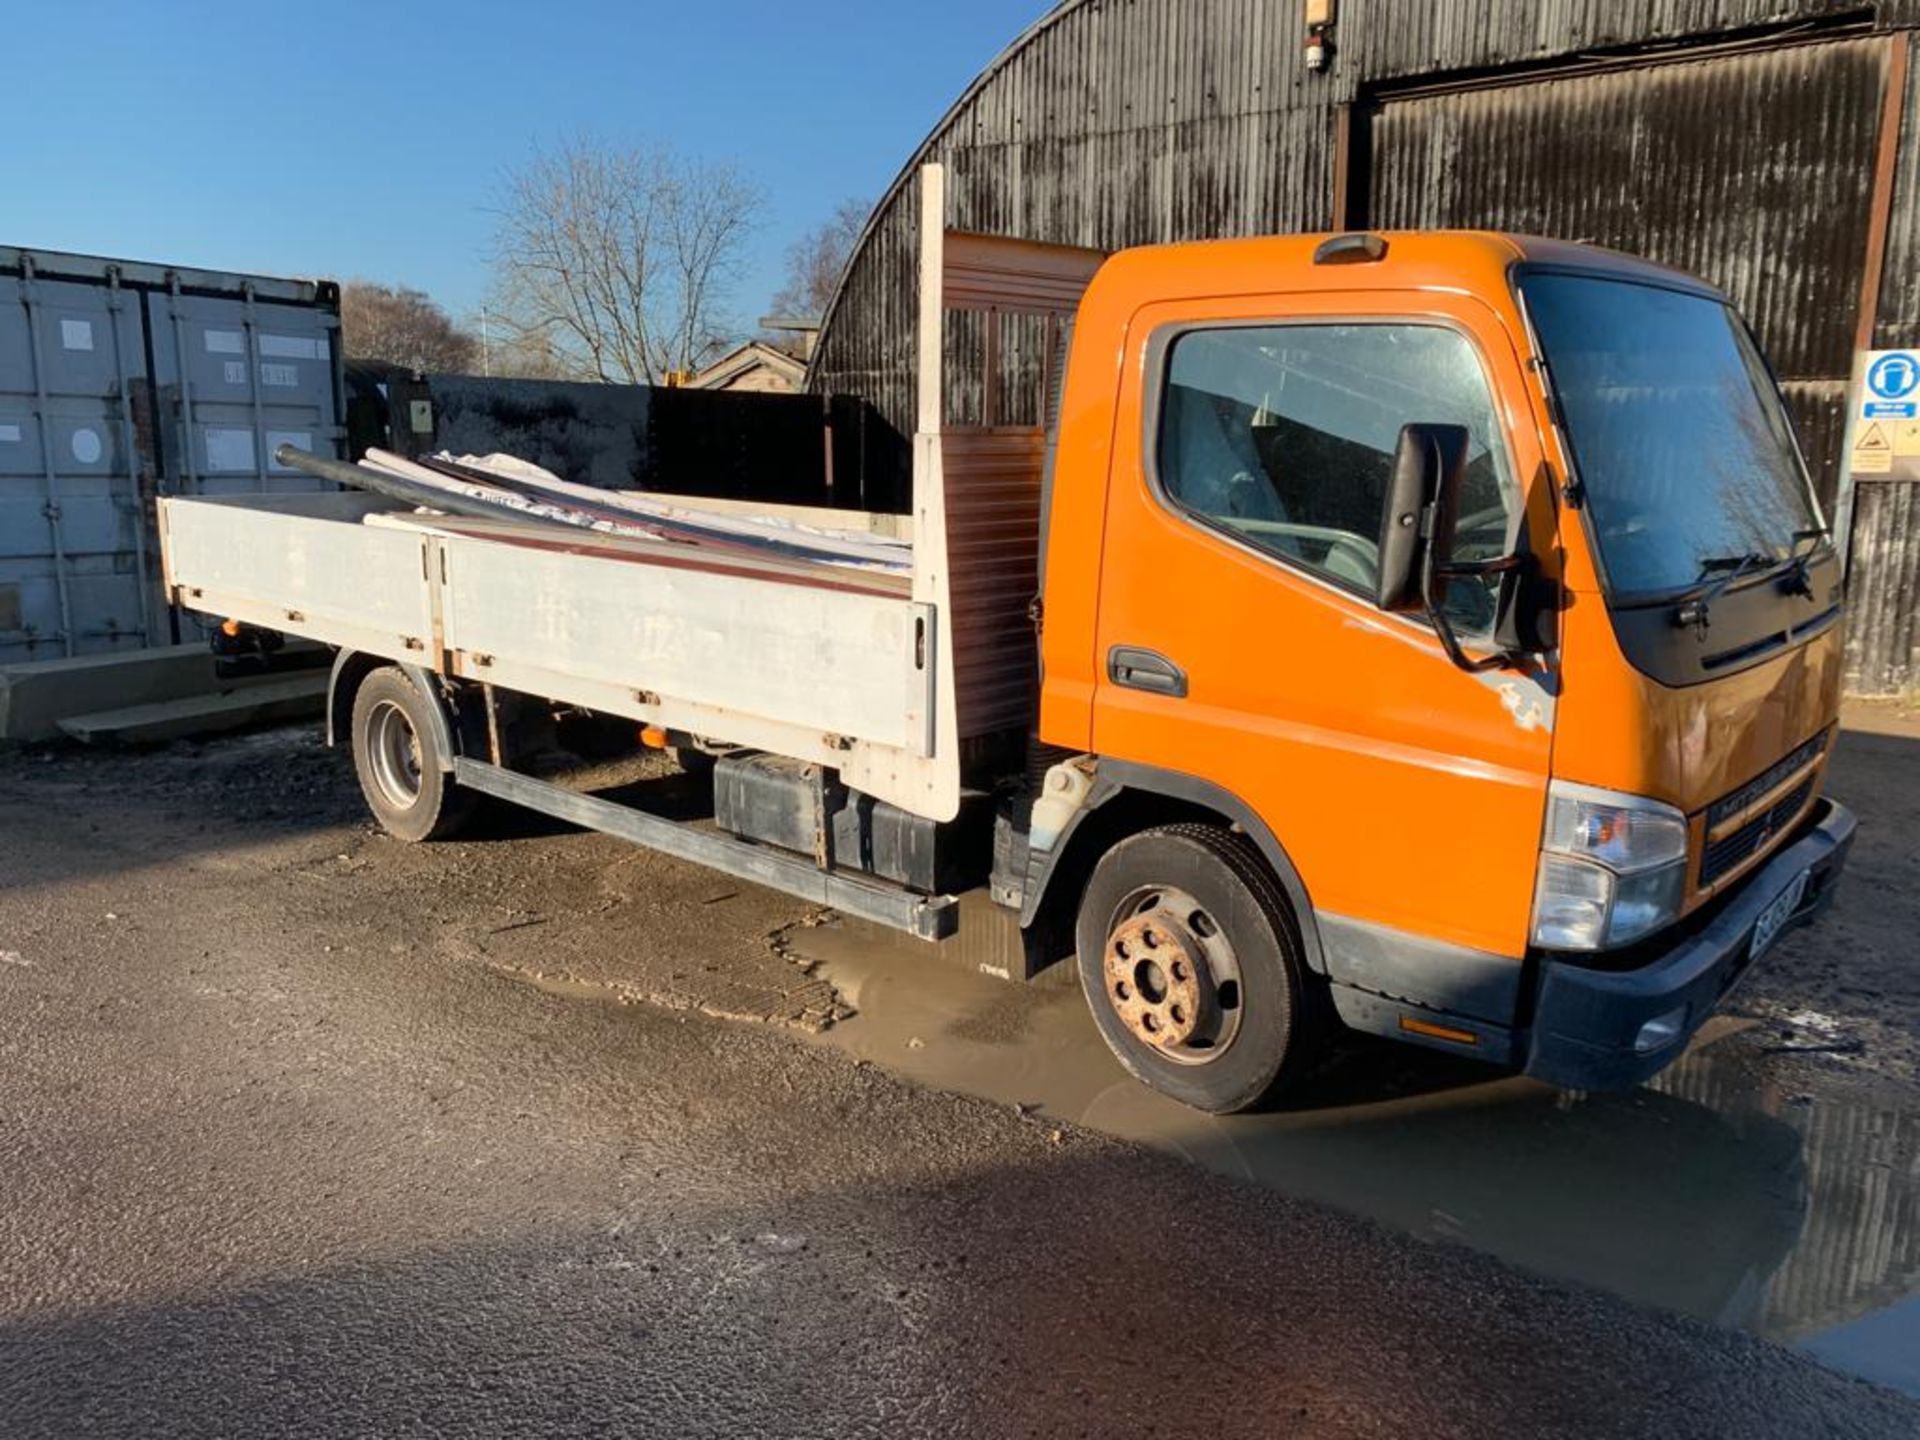 2009 REG MITSUBISHI FUSO CANTER 7C15 3.0 DIESEL ORANGE DROPSIDE LORRY, SHOWING 2 FORMER KEEPERS